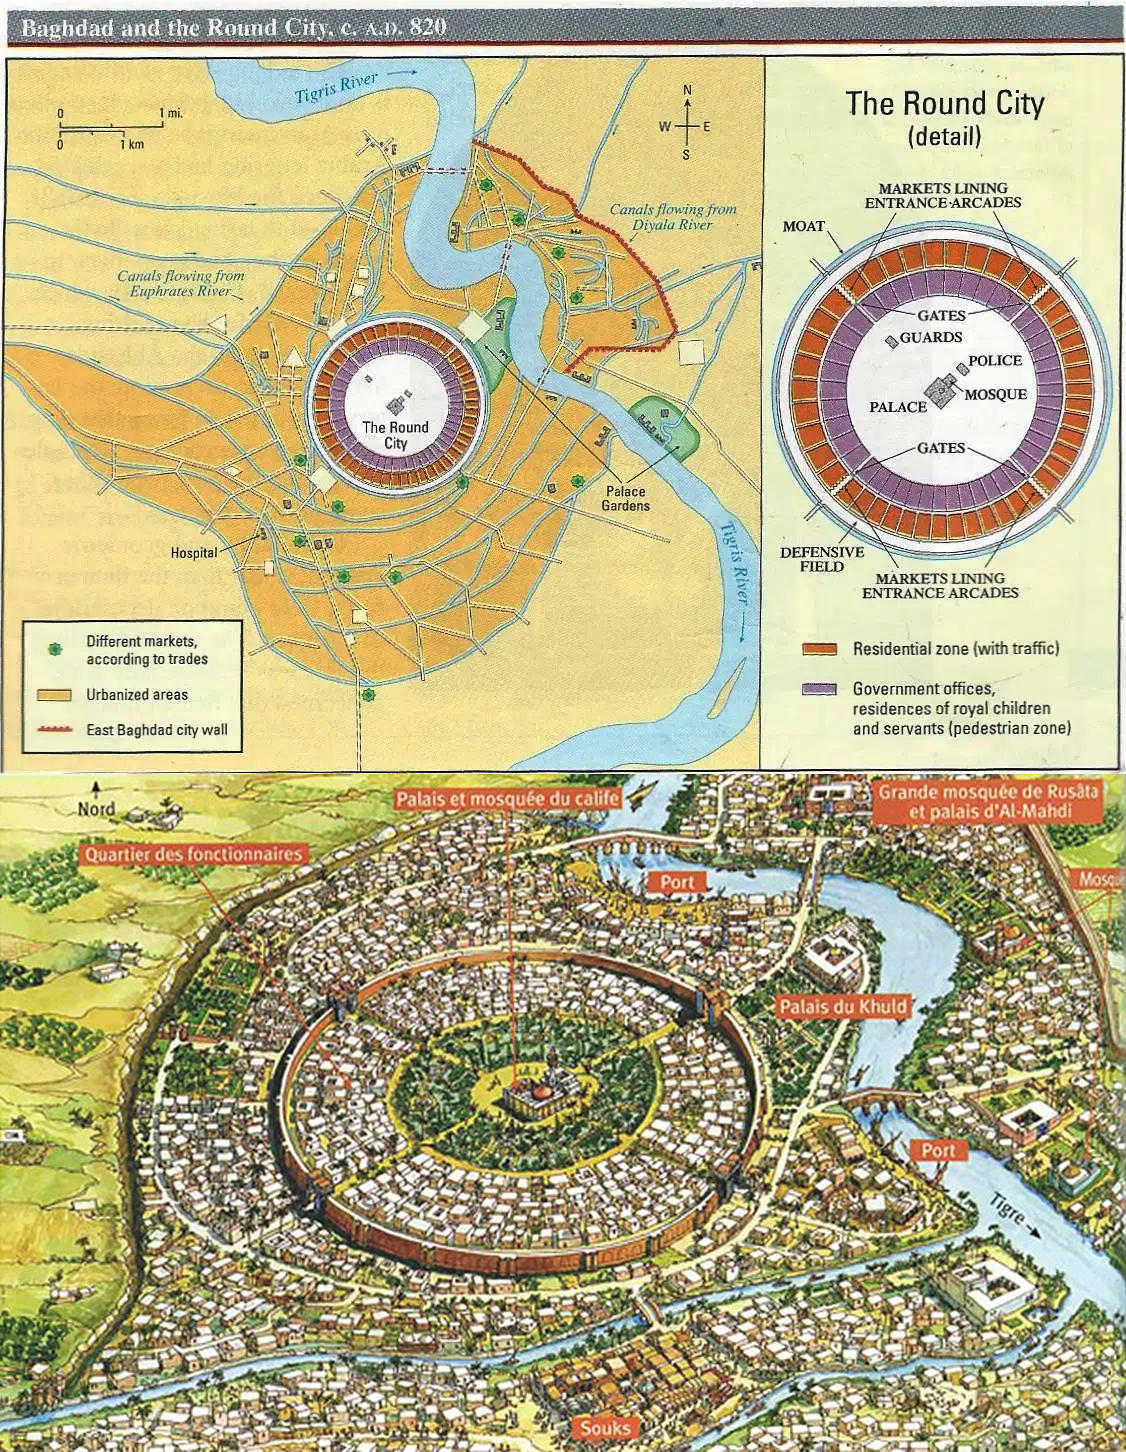 The round city of Baghdad before the Mongol invasion.png